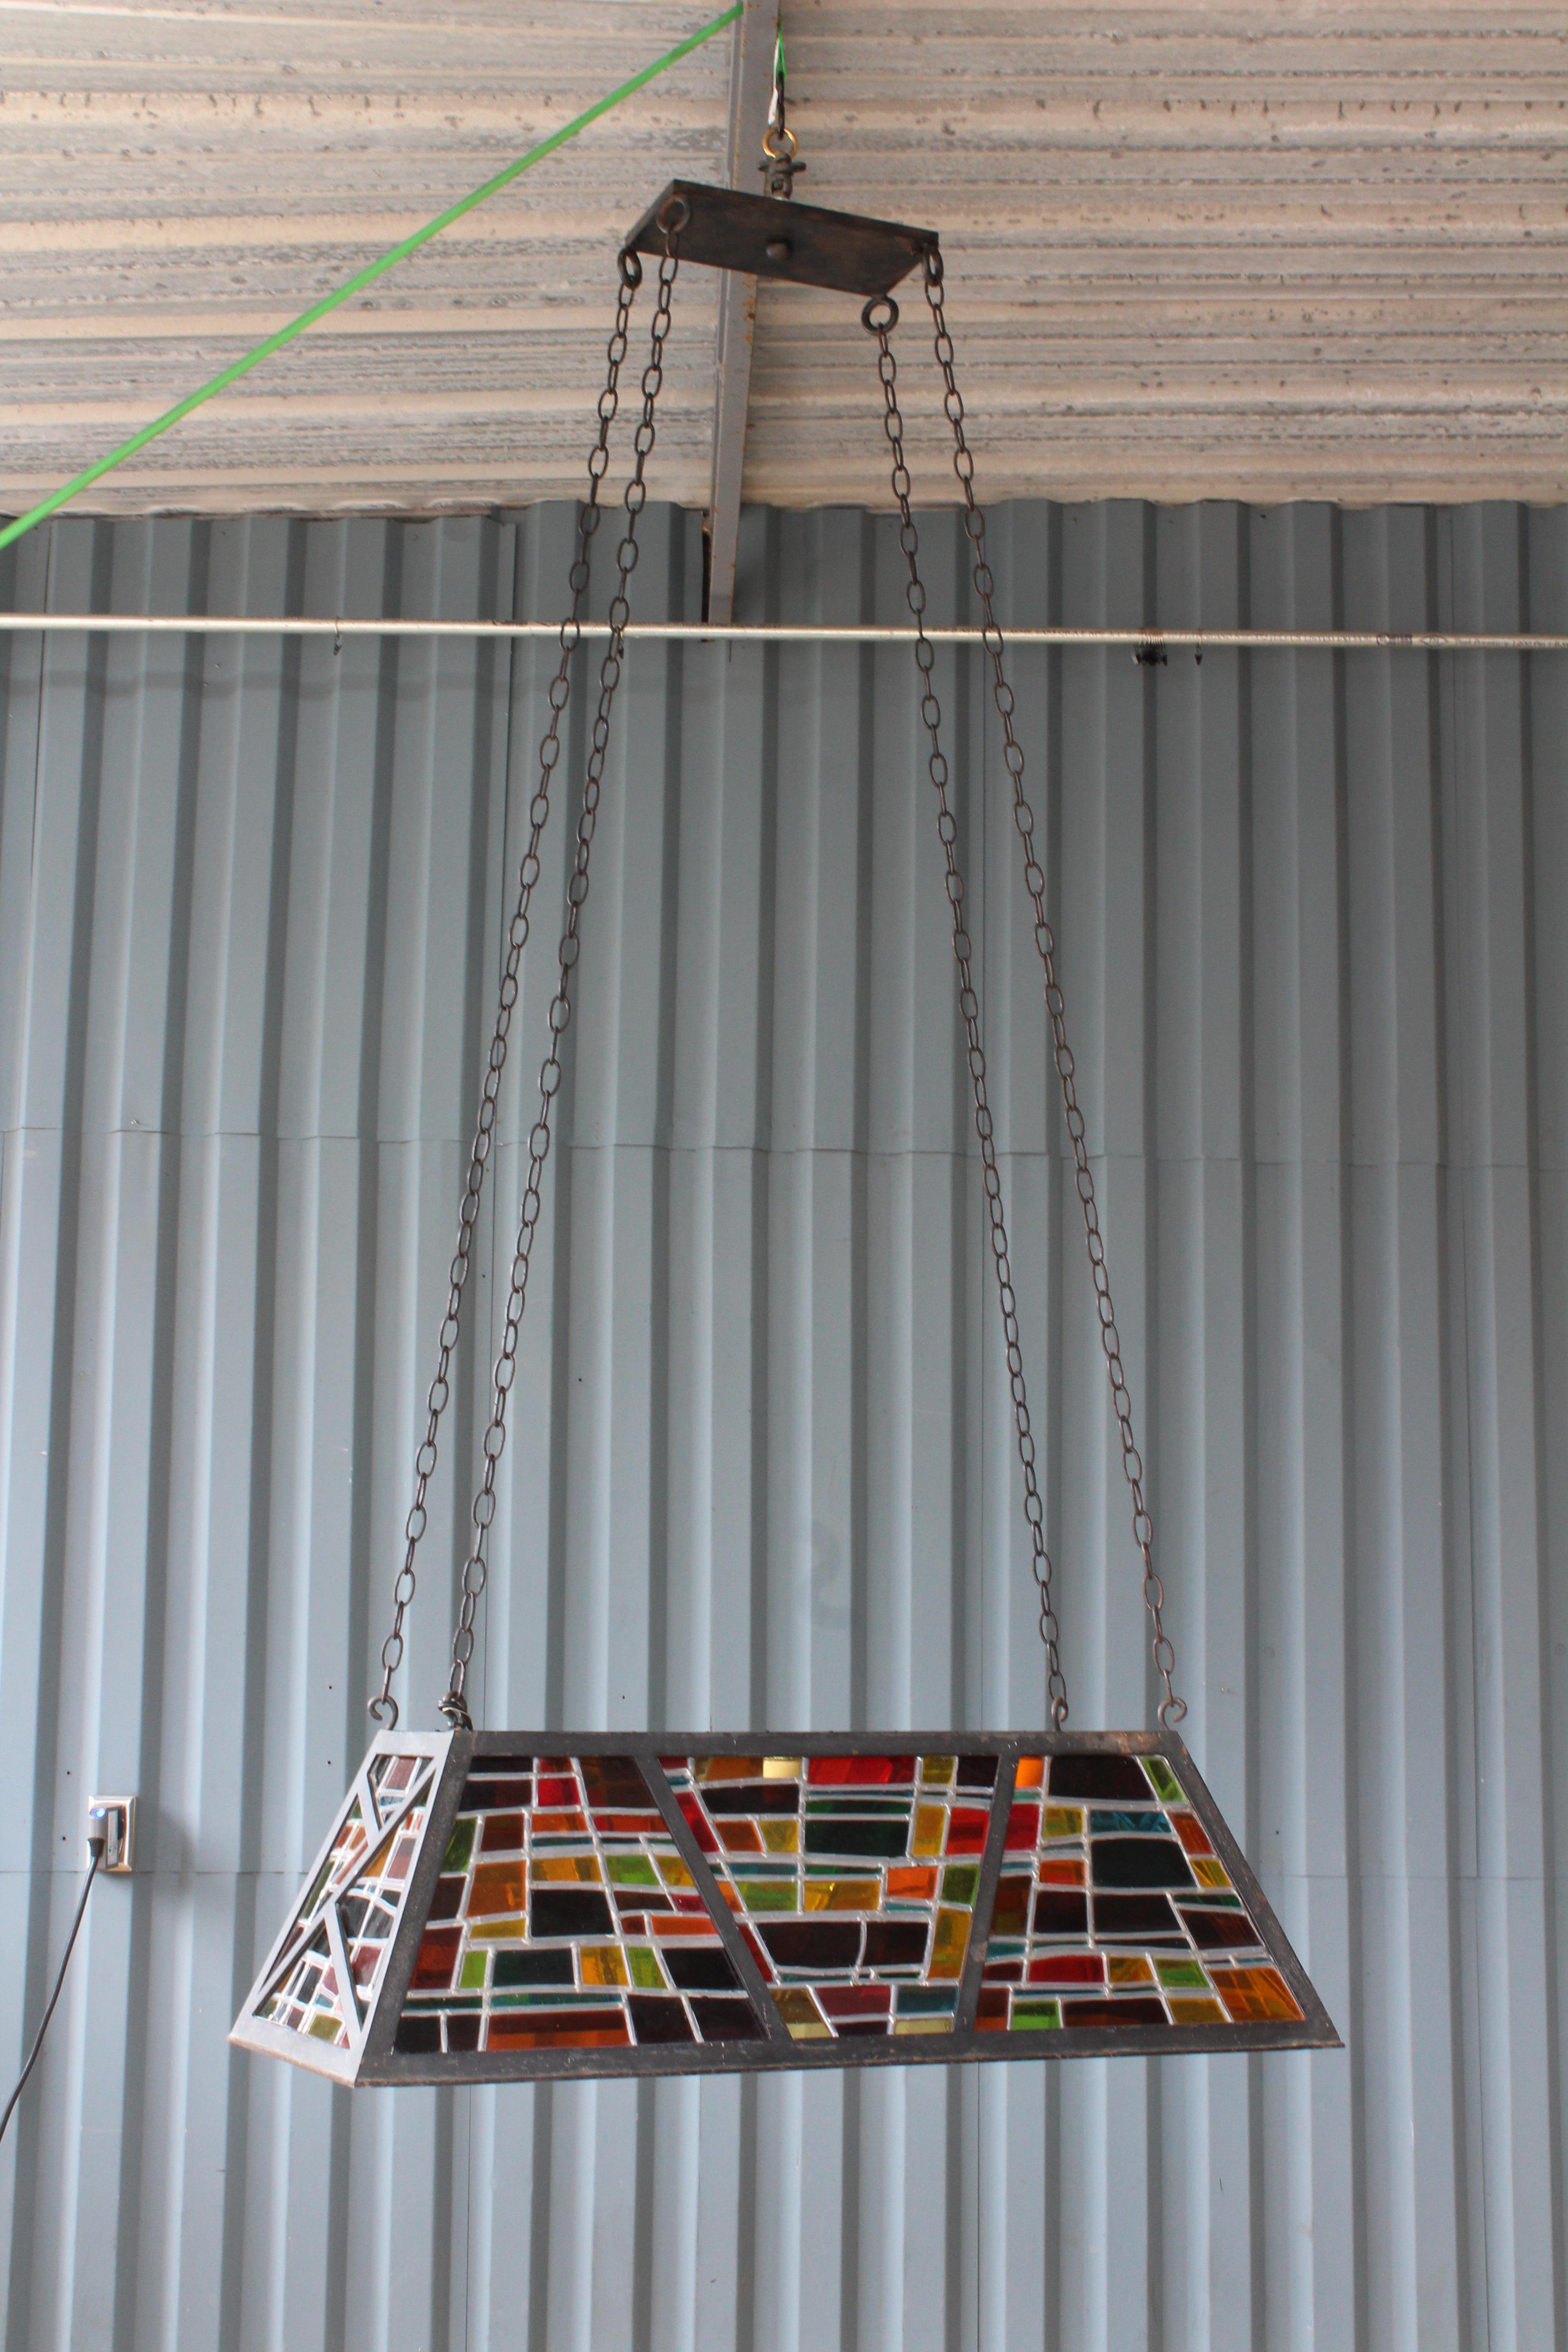 Iron hanging billiard light with multicolored stained glass panels, France, 1960s. Completely refinished with new chain and canopy and new wiring. Uses three standard light bulbs. Chains can be adjusted to your preferred over all height. Overall